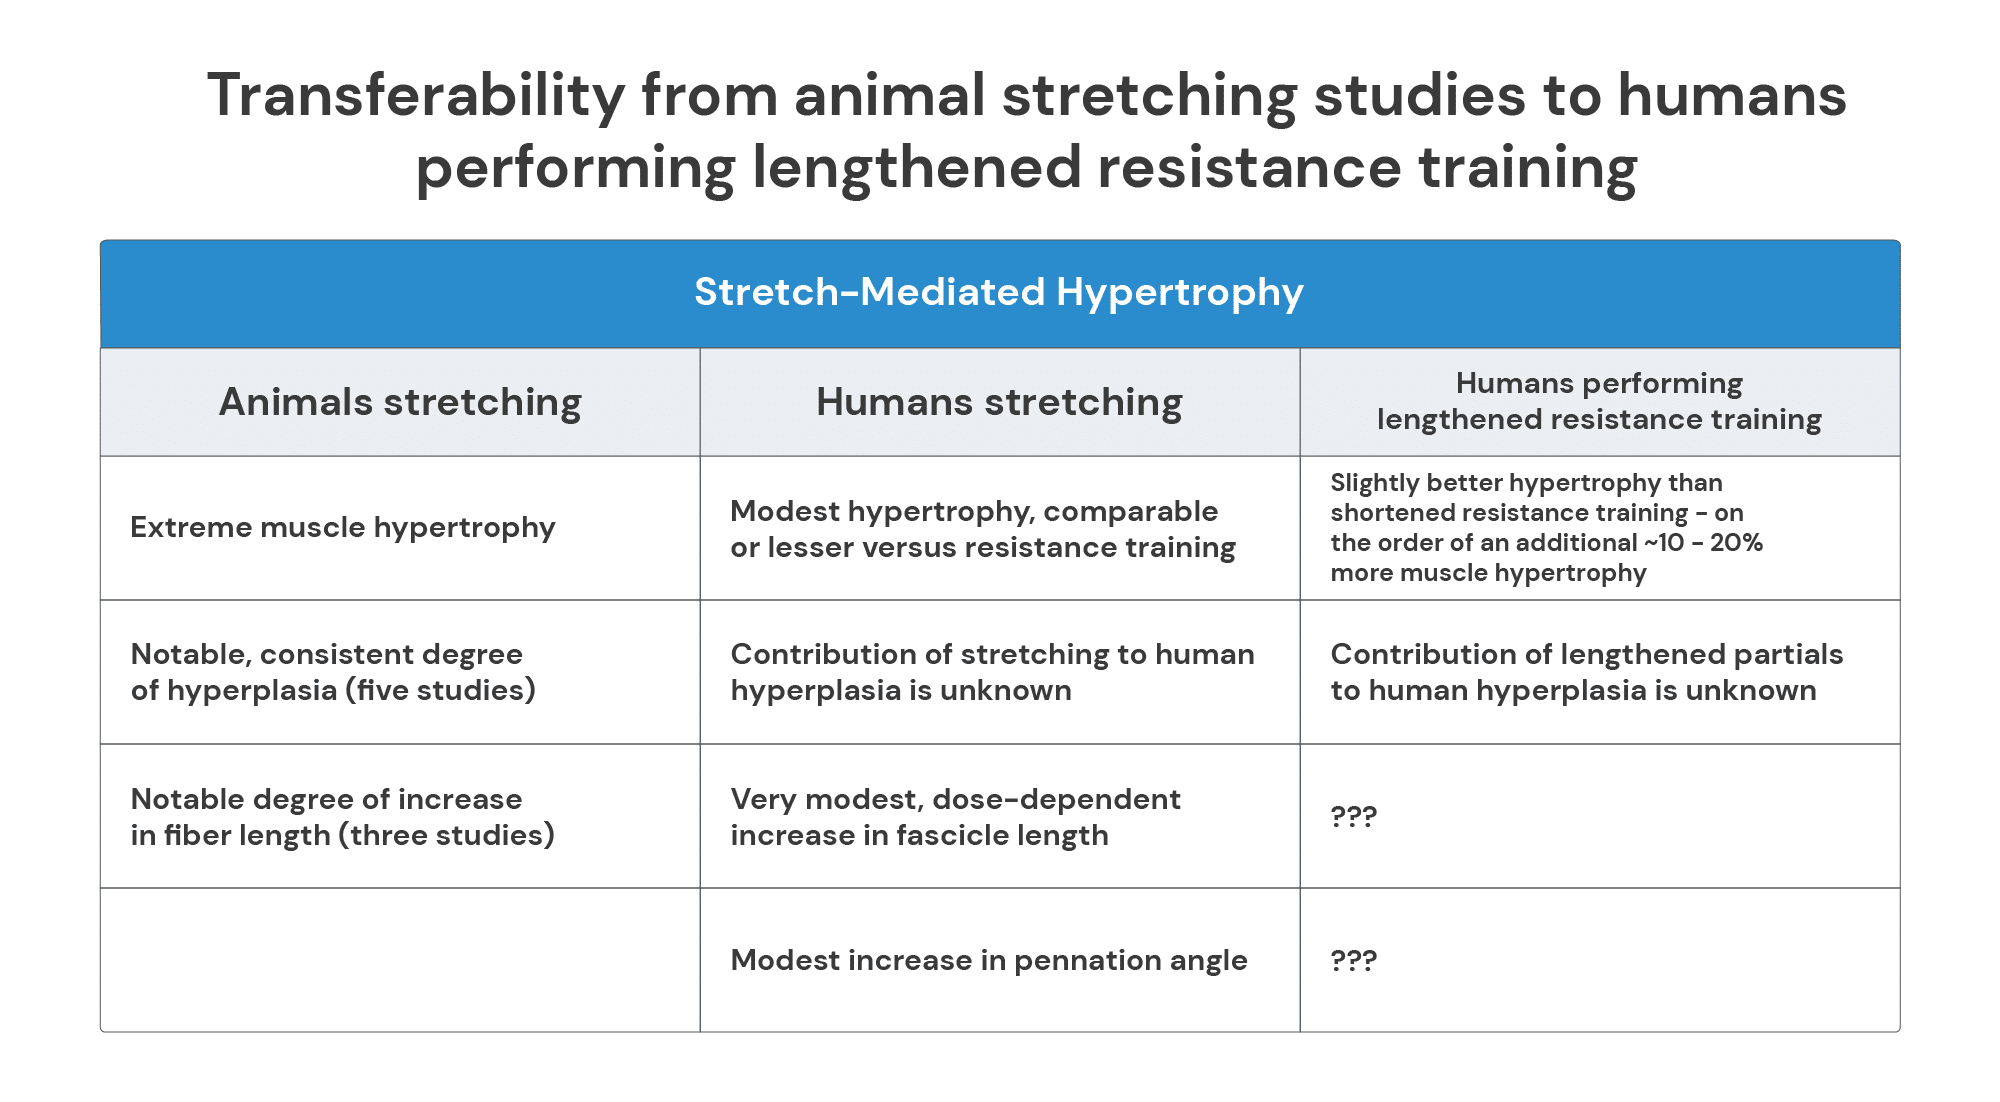 Transferability from animals stretching studies to humans performing lengthened resistance training